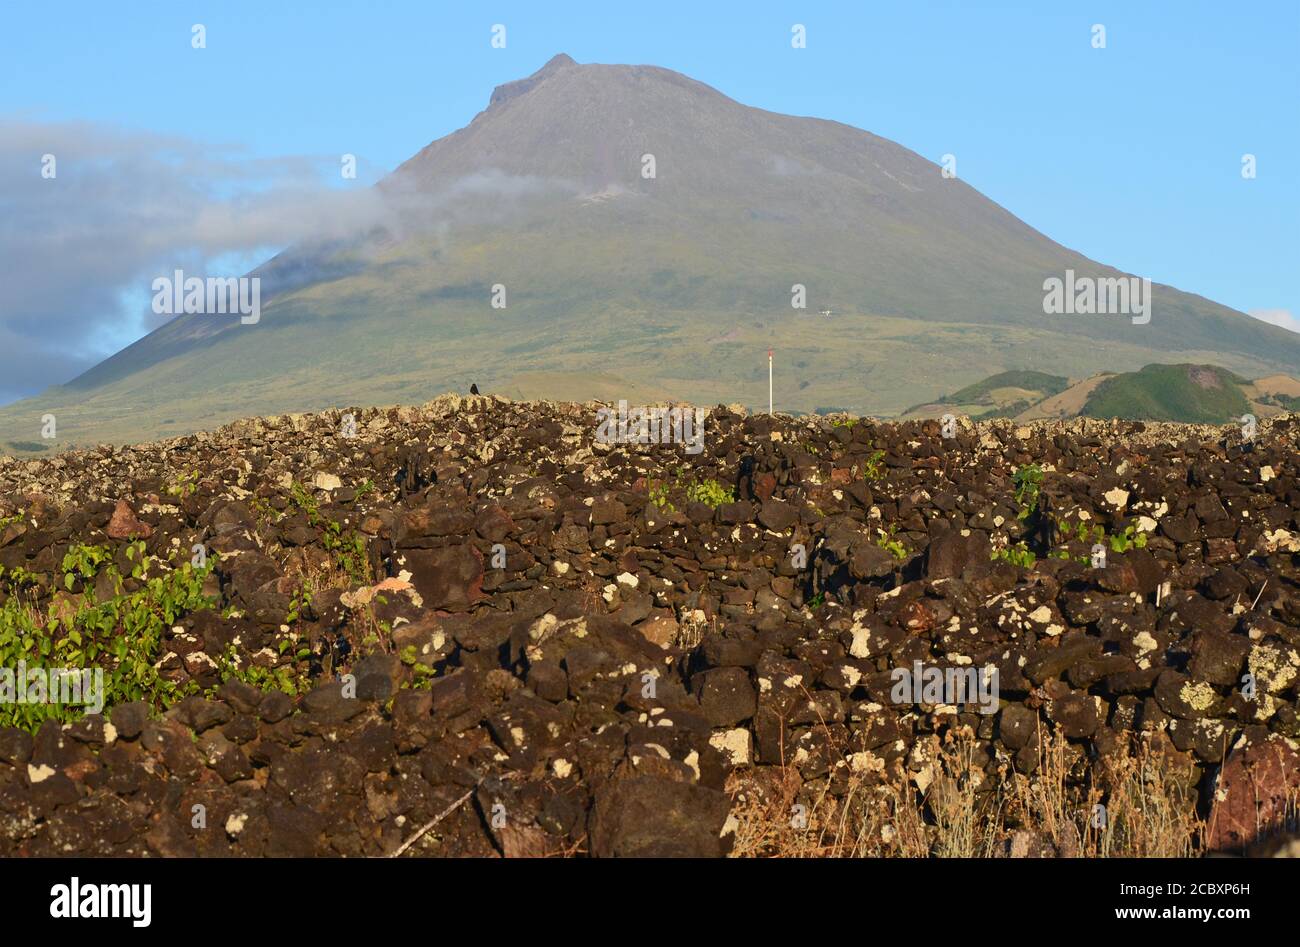 The conical Pico volcano looming over its namesake island, Azores archipelago, Portugal Stock Photo